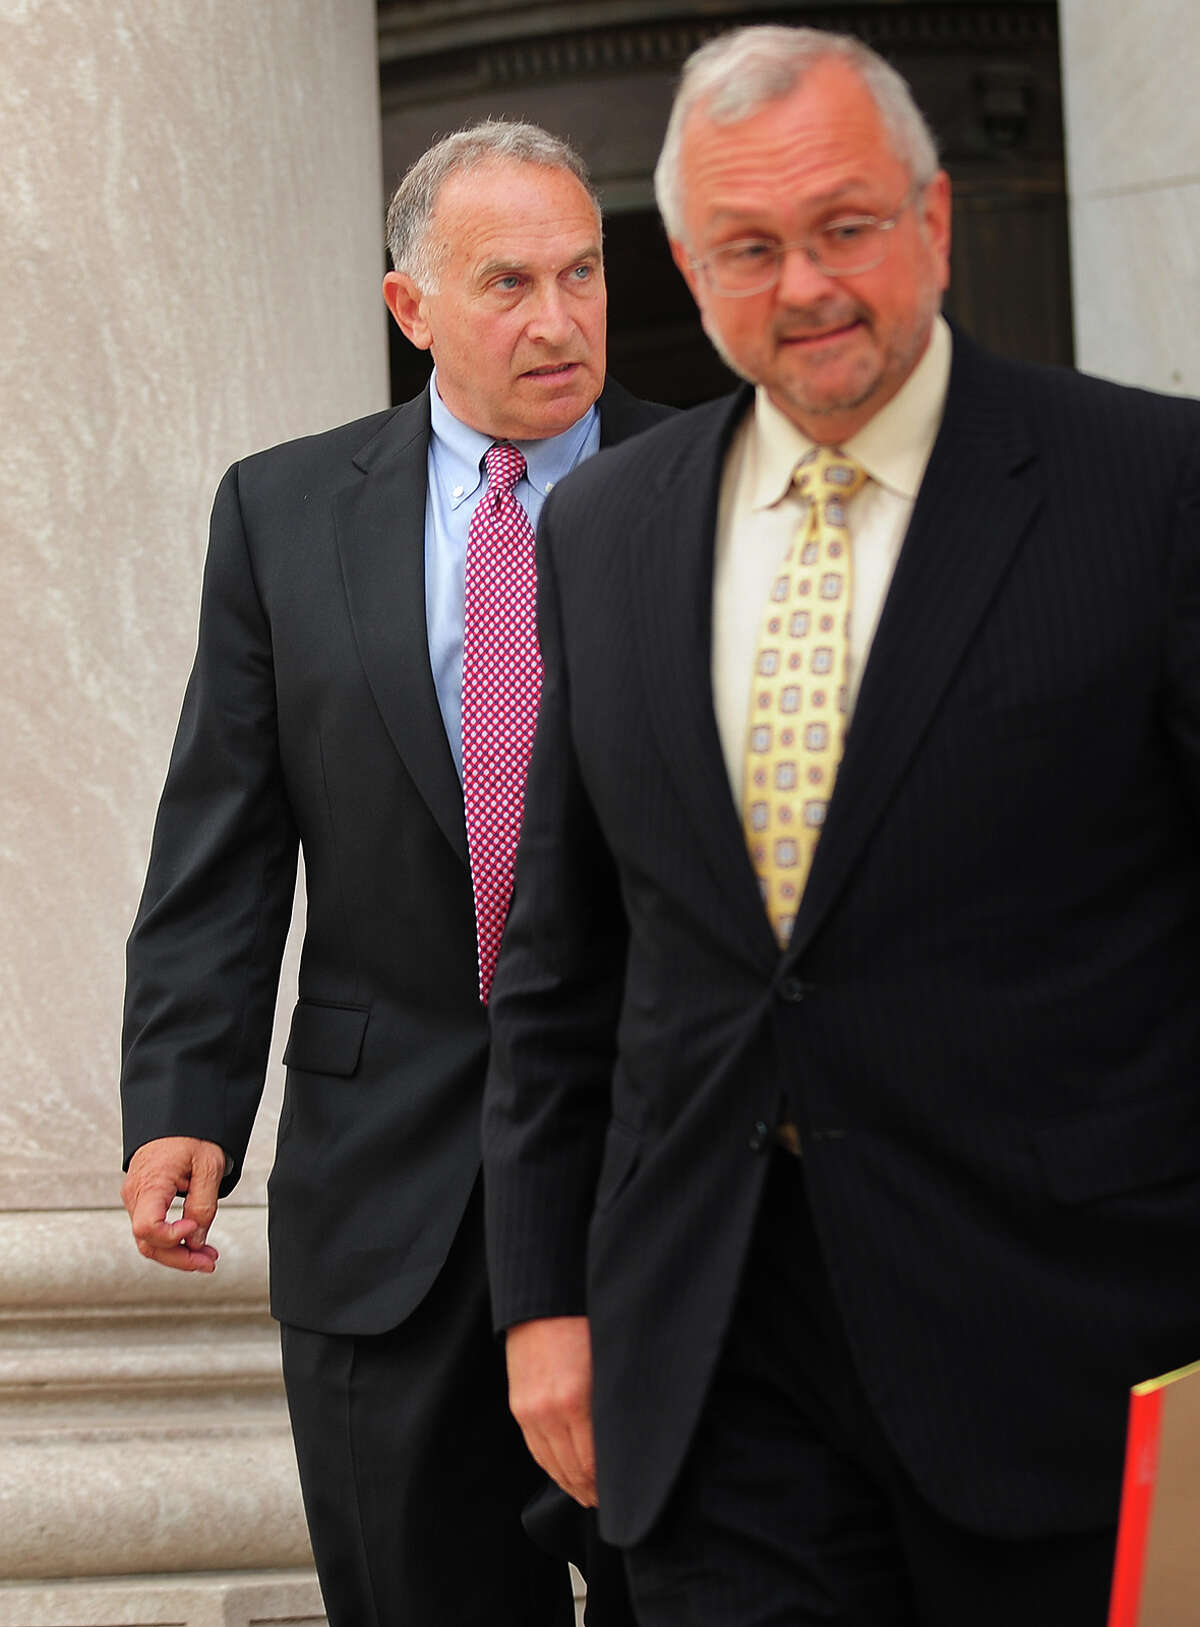 Mark Greenberg, left, witness in the trial of former Governor John Rowland, exits federal court in New Haven, Conn. on Wednesday, September 3, 2014. Rowland is on trial on seven charges including conspiracy and obstruction of justice.